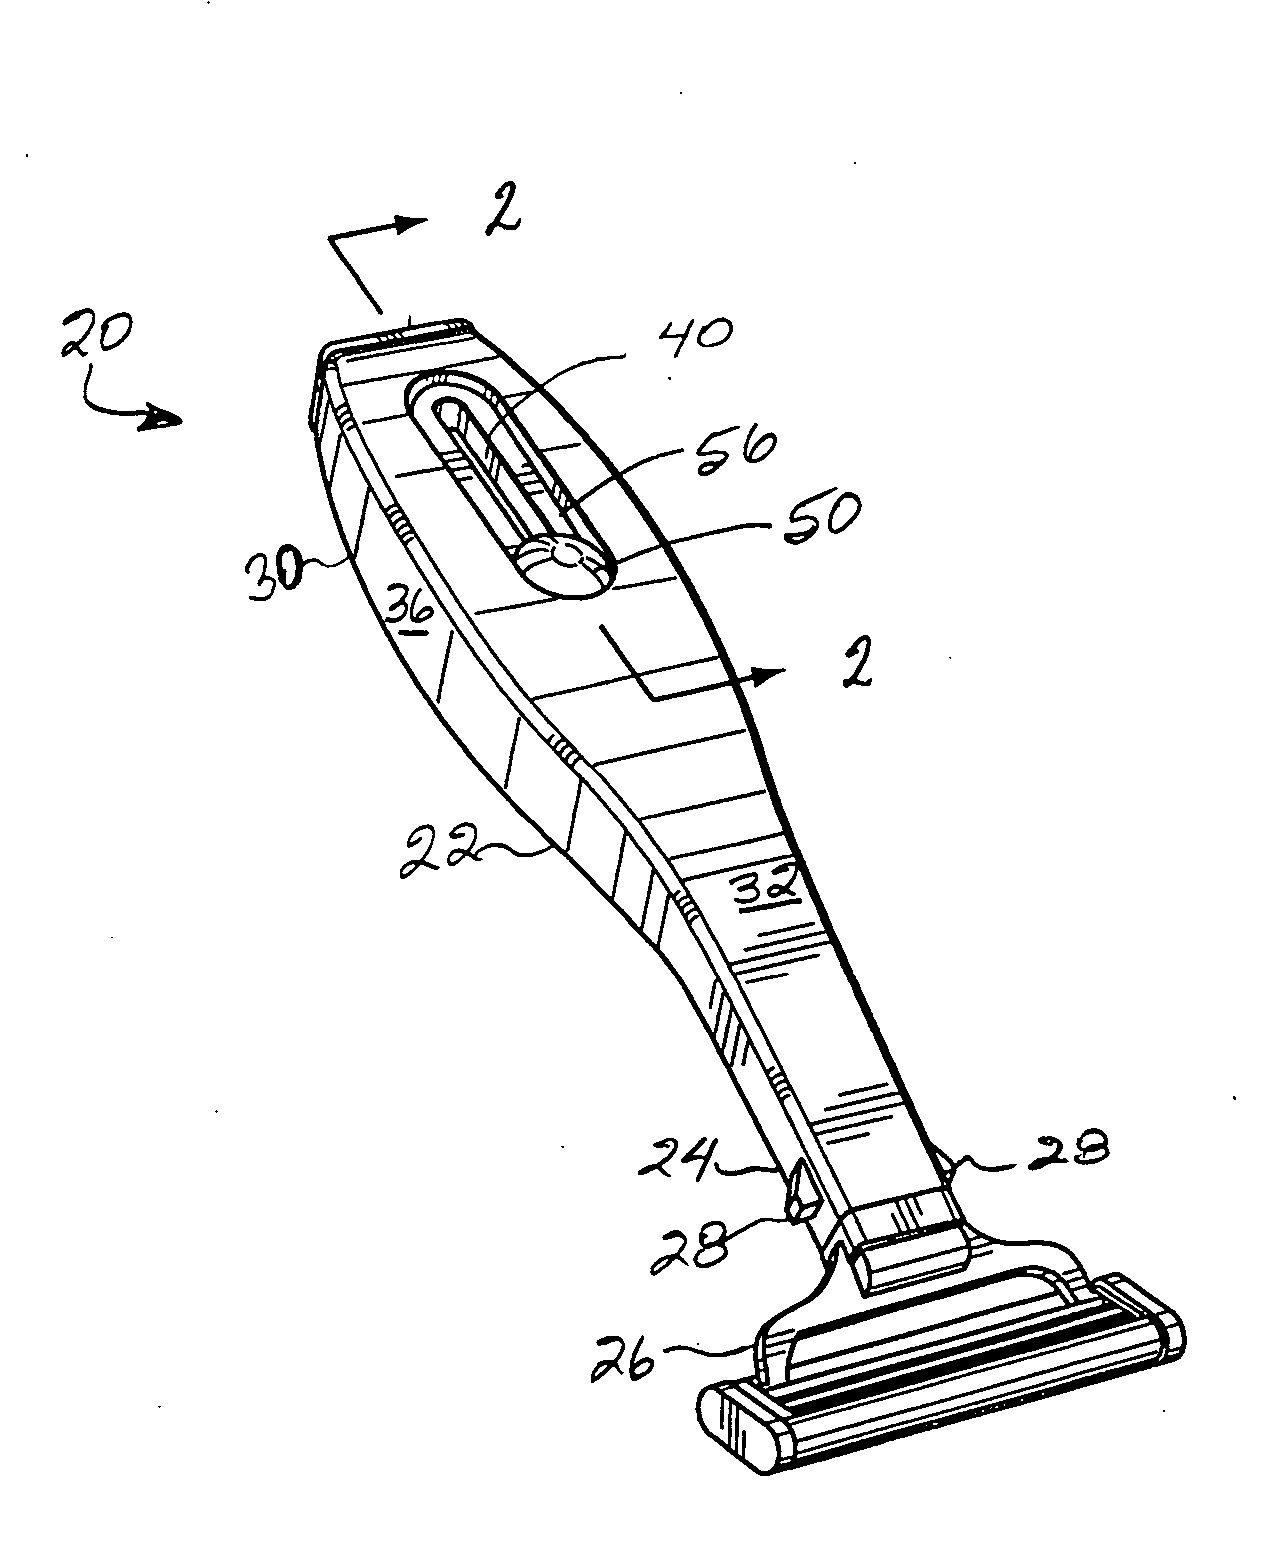 Razor with integral trimming wand